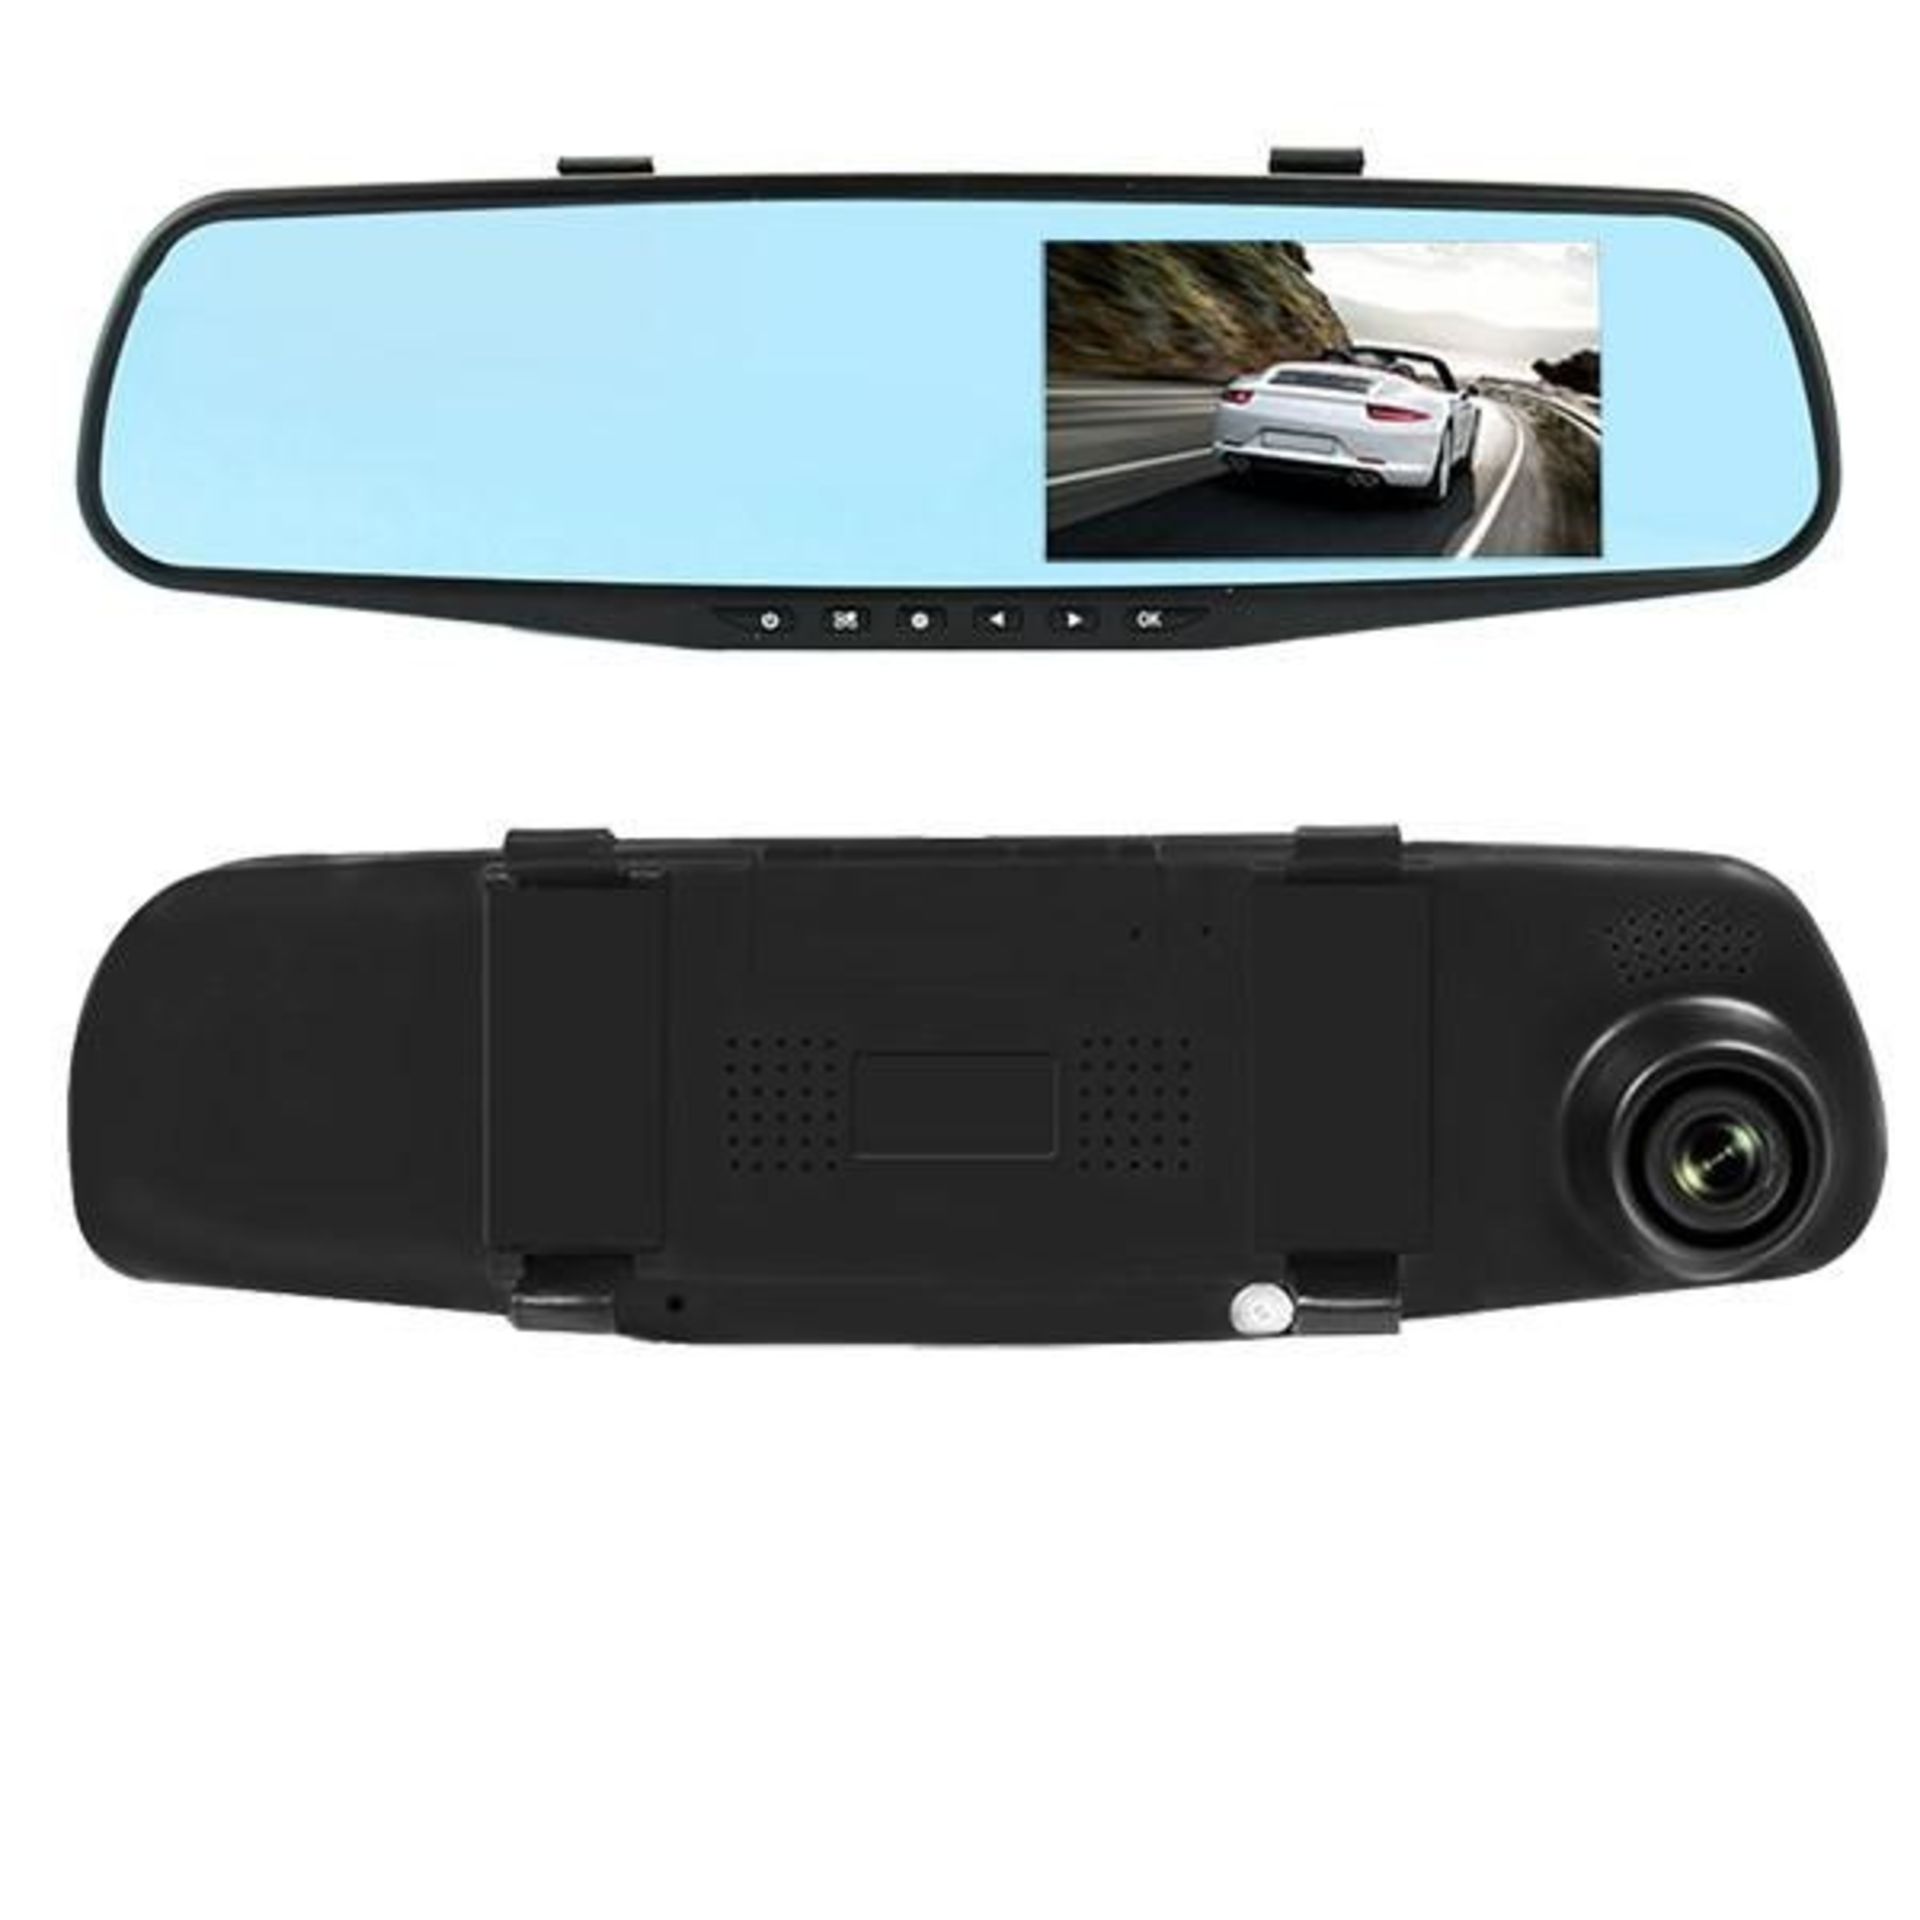 V Brand New Vehicle Rear View Mirror Dash Cam - Attaches to Existing Mirror With Active